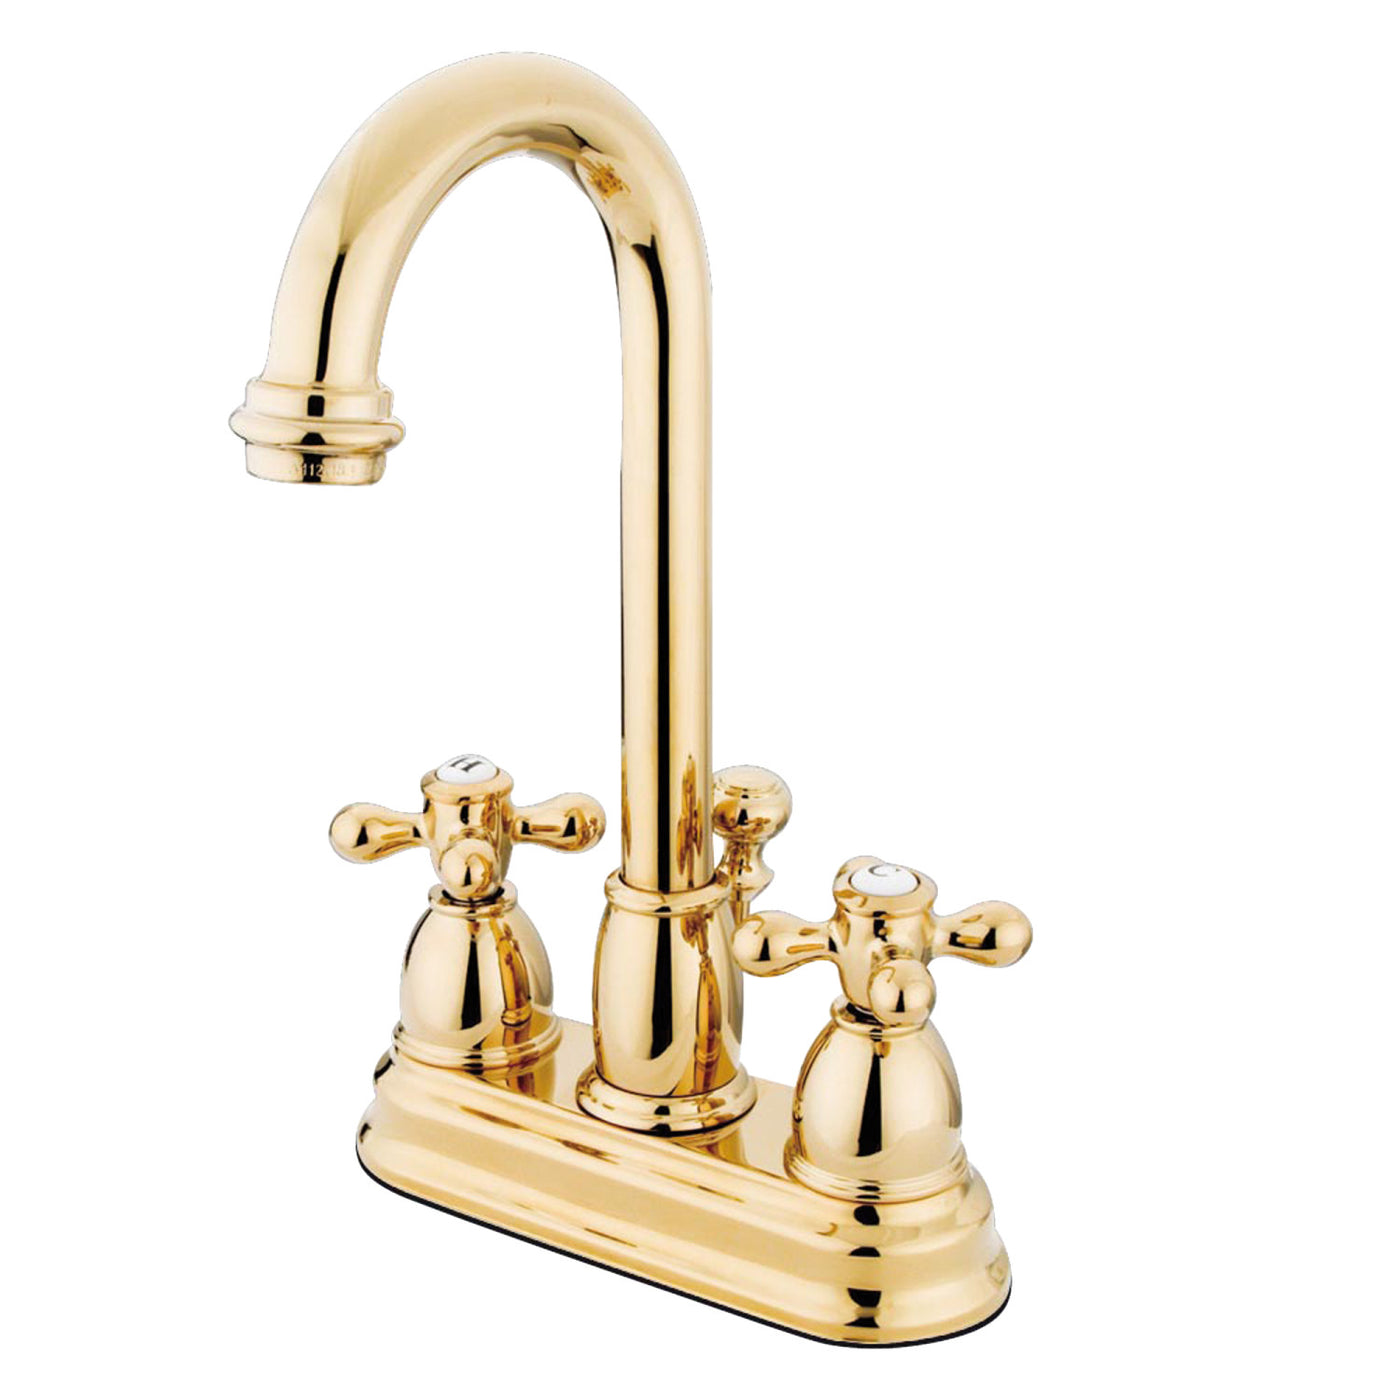 Elements of Design EB3612AX 4-Inch Centerset Bathroom Faucet, Polished Brass